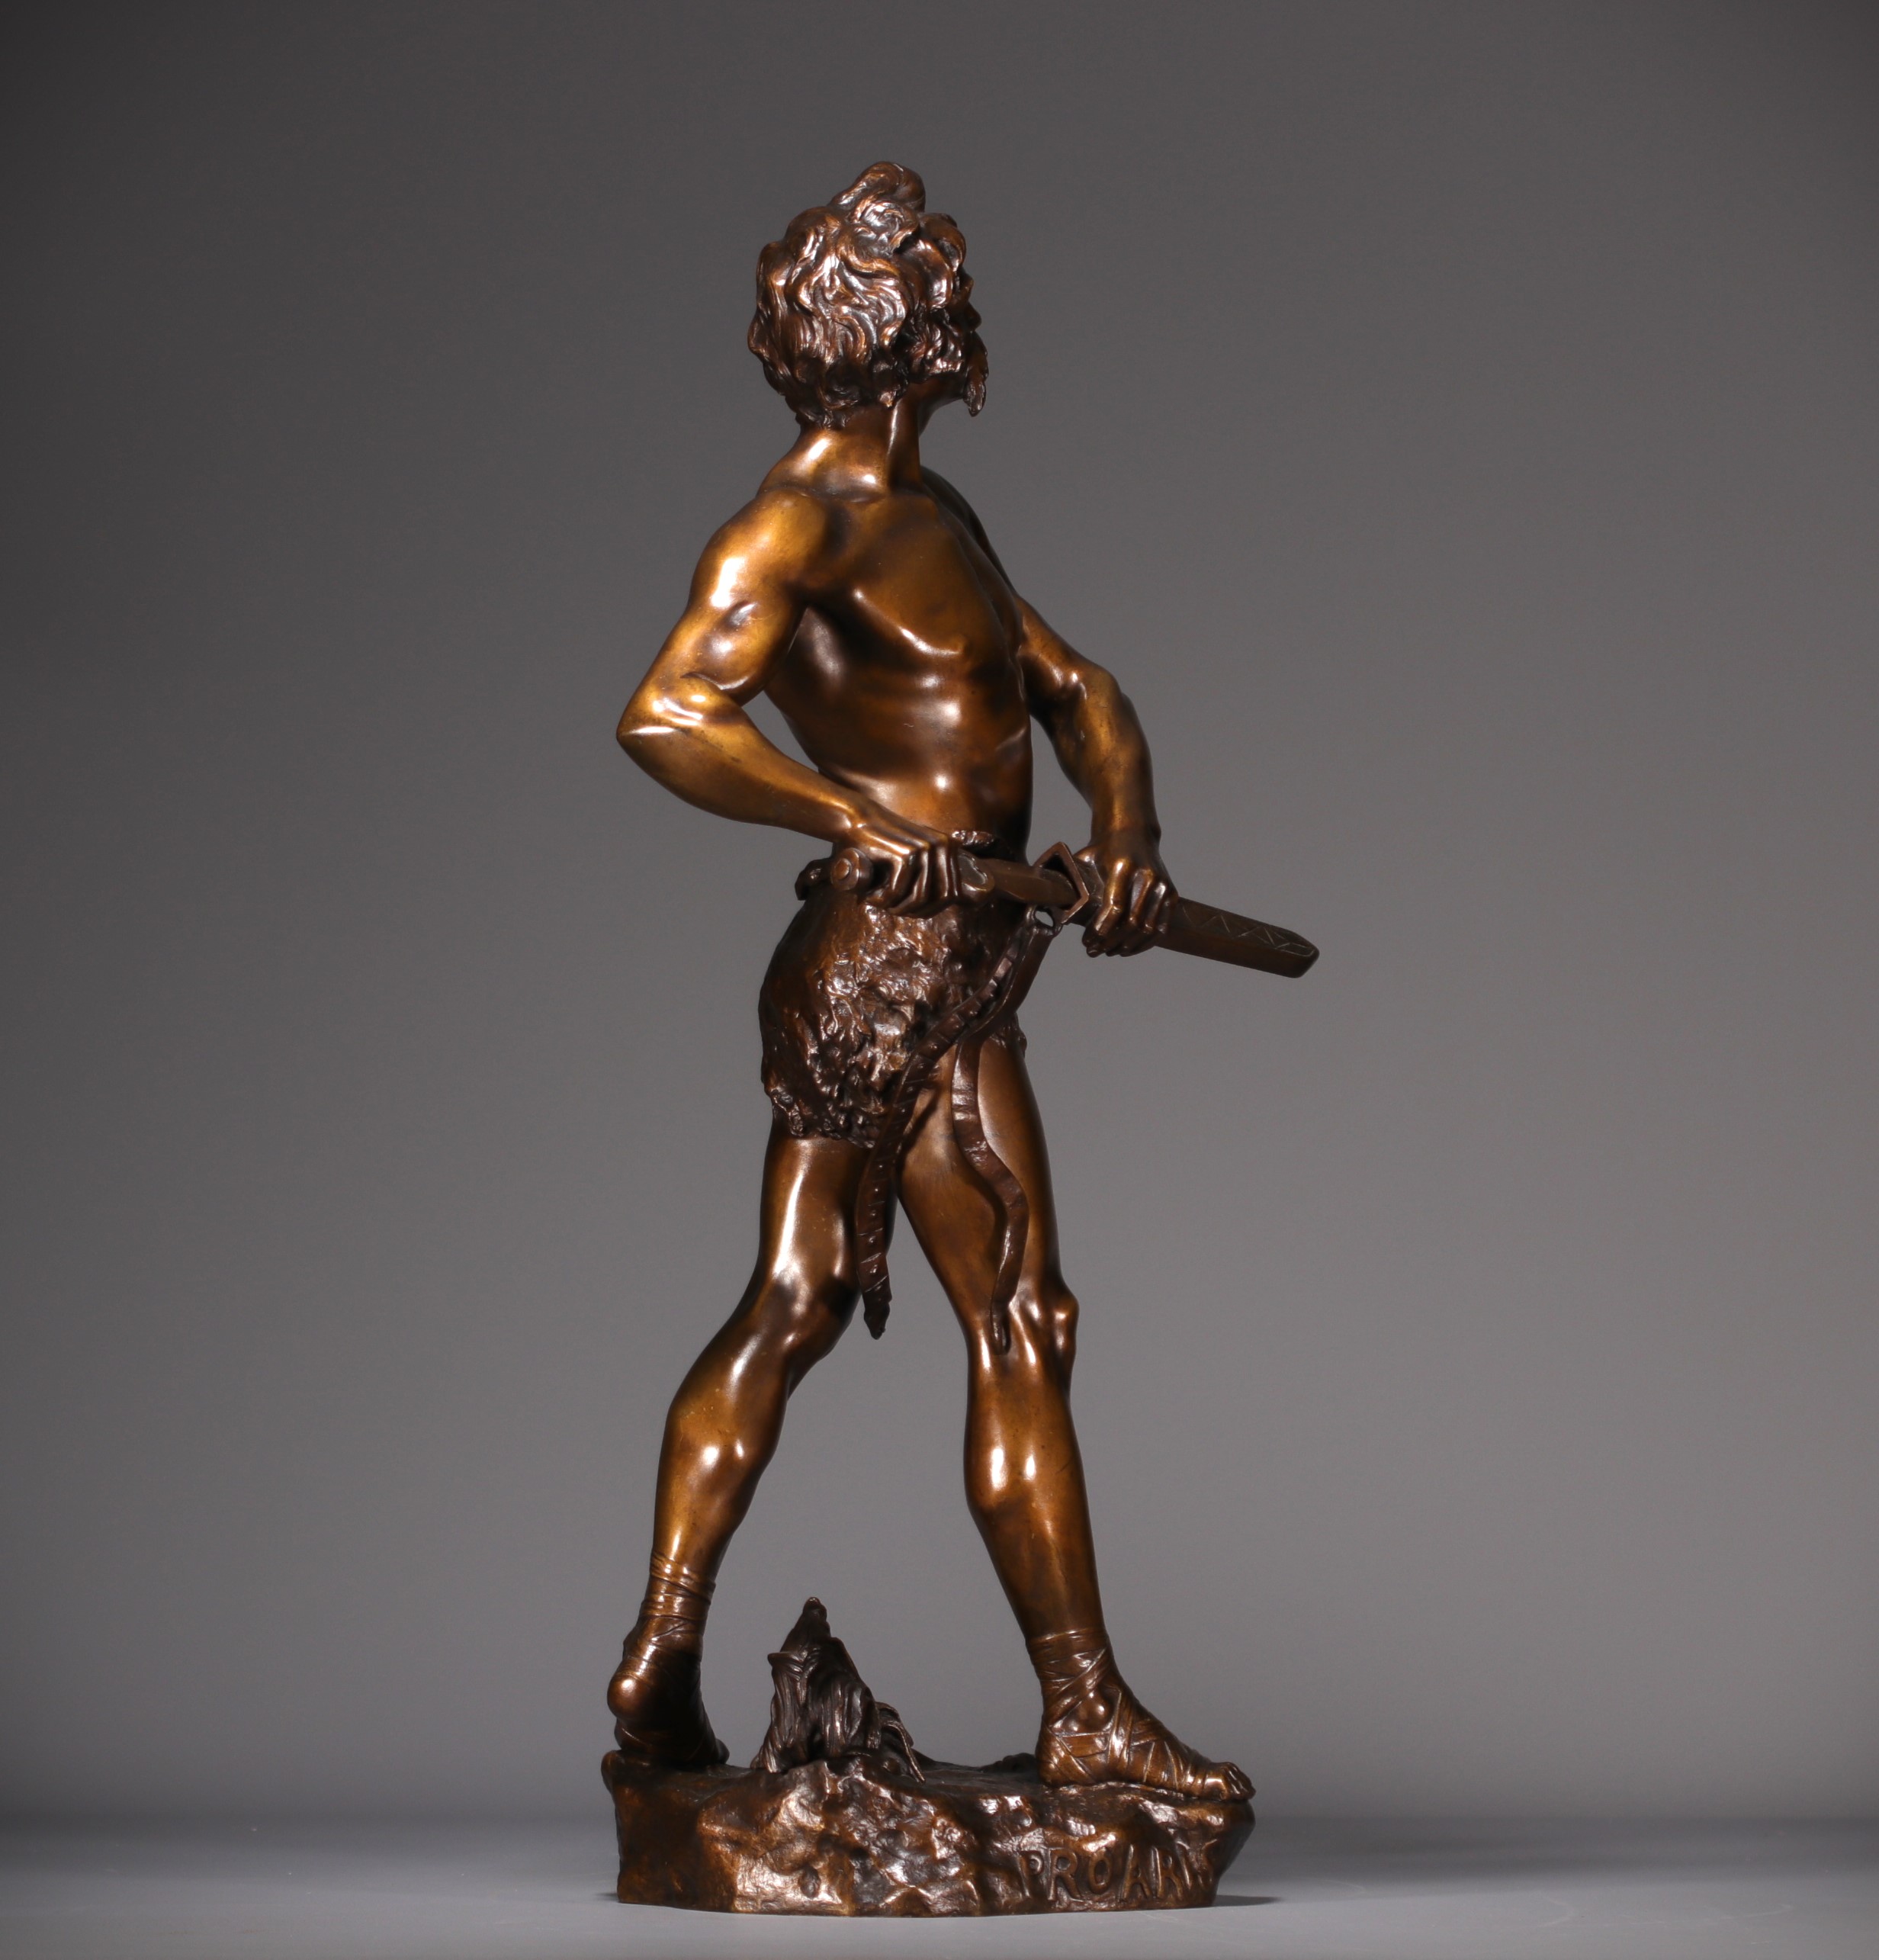 Henri FUGERE (1872-1944) "PRO ARIS ET FOCIS" Statue in bronze with shaded patina. - Image 3 of 6